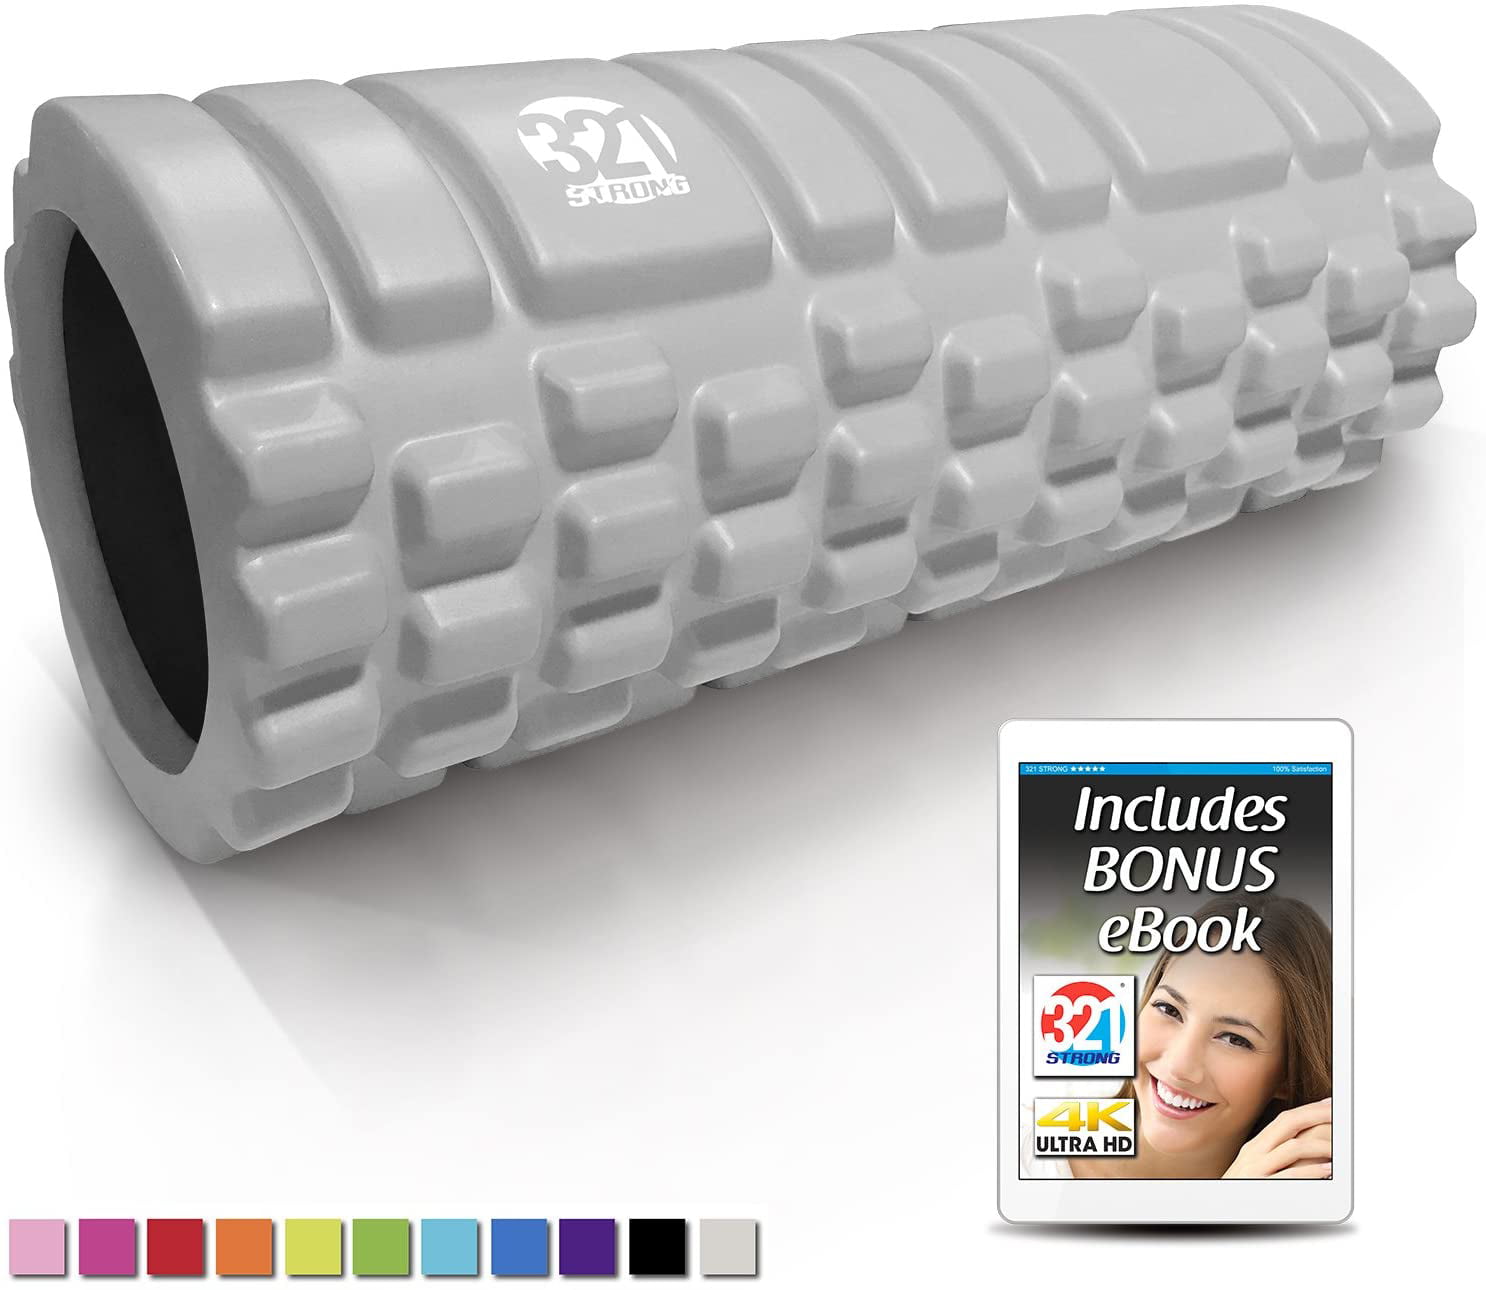 Medium Density Deep Tissue Massager for Muscle Massage and Myofascial Trigger Point Release Renewed with 4K eBook 321 STRONG Foam Roller 